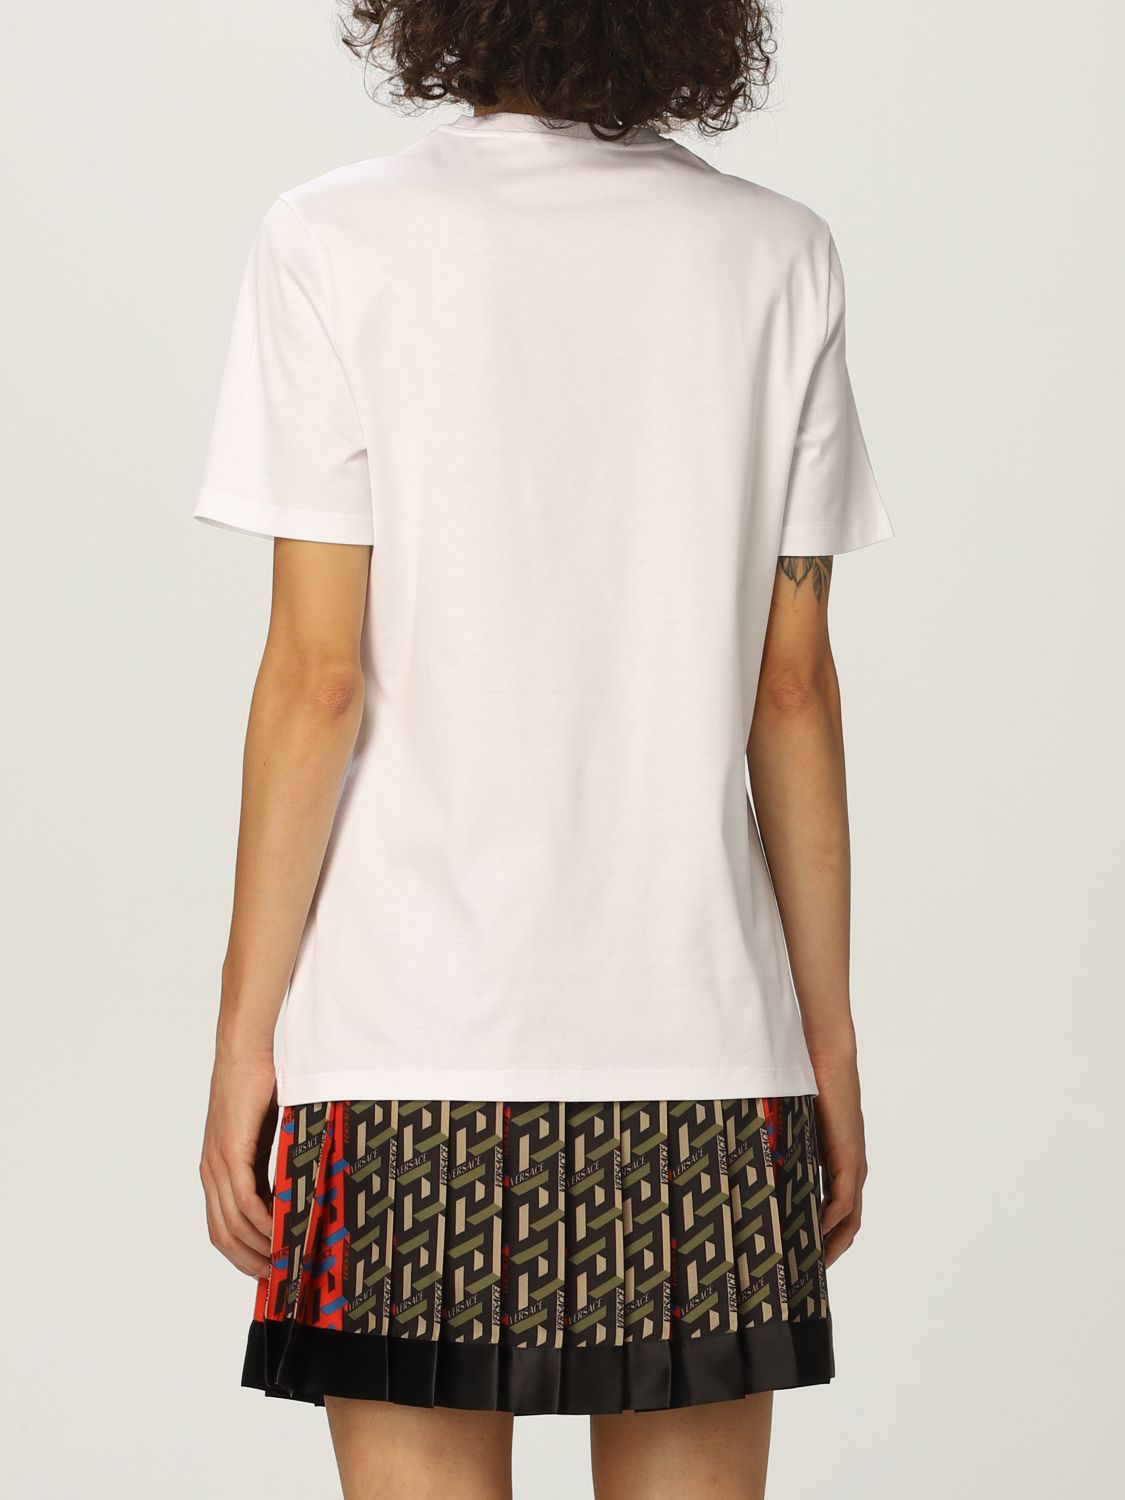 T-Shirt Versace: Versace cotton T-shirt featuring Medusa Smiley and logo white 3